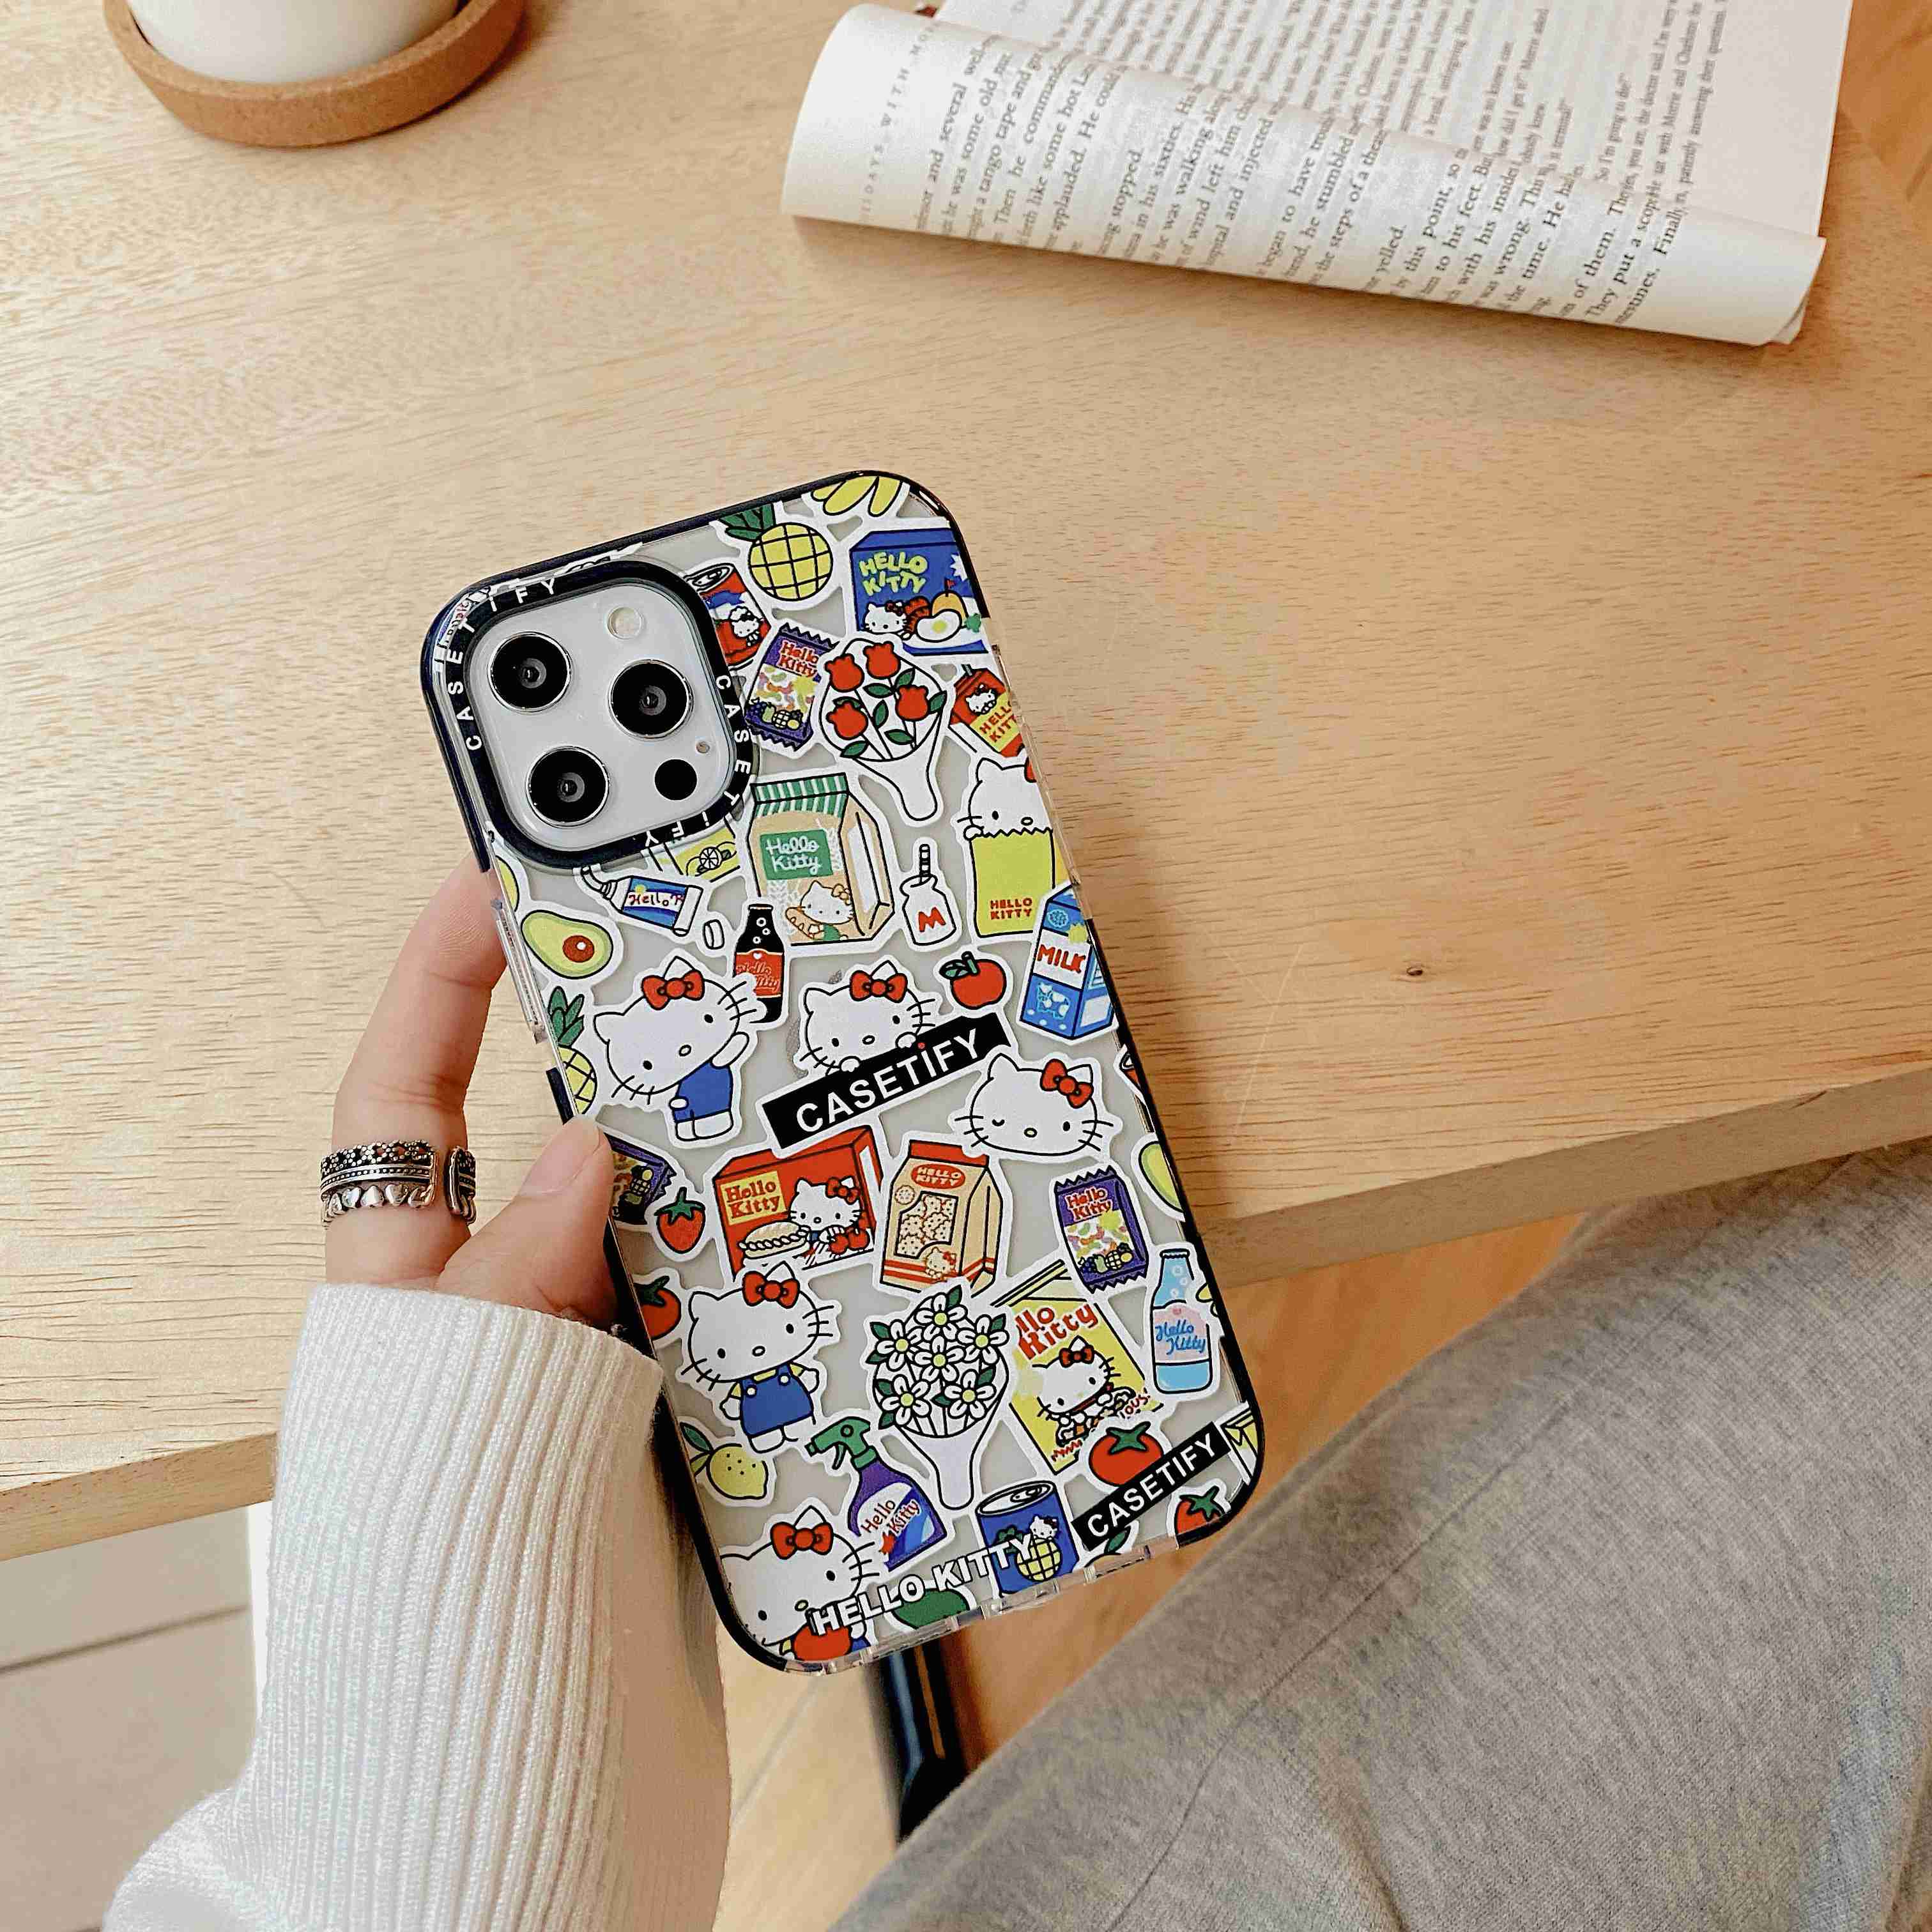 【High Quality+CaseTIFY】case iphone 11 pro max iphone 6 plus iphone x iphone 12 por max iphone 7 plus iphone 6s iphone 8 plus iphone xr iPhone xs max iphone se2020 iphone 12 mini silicone protective case